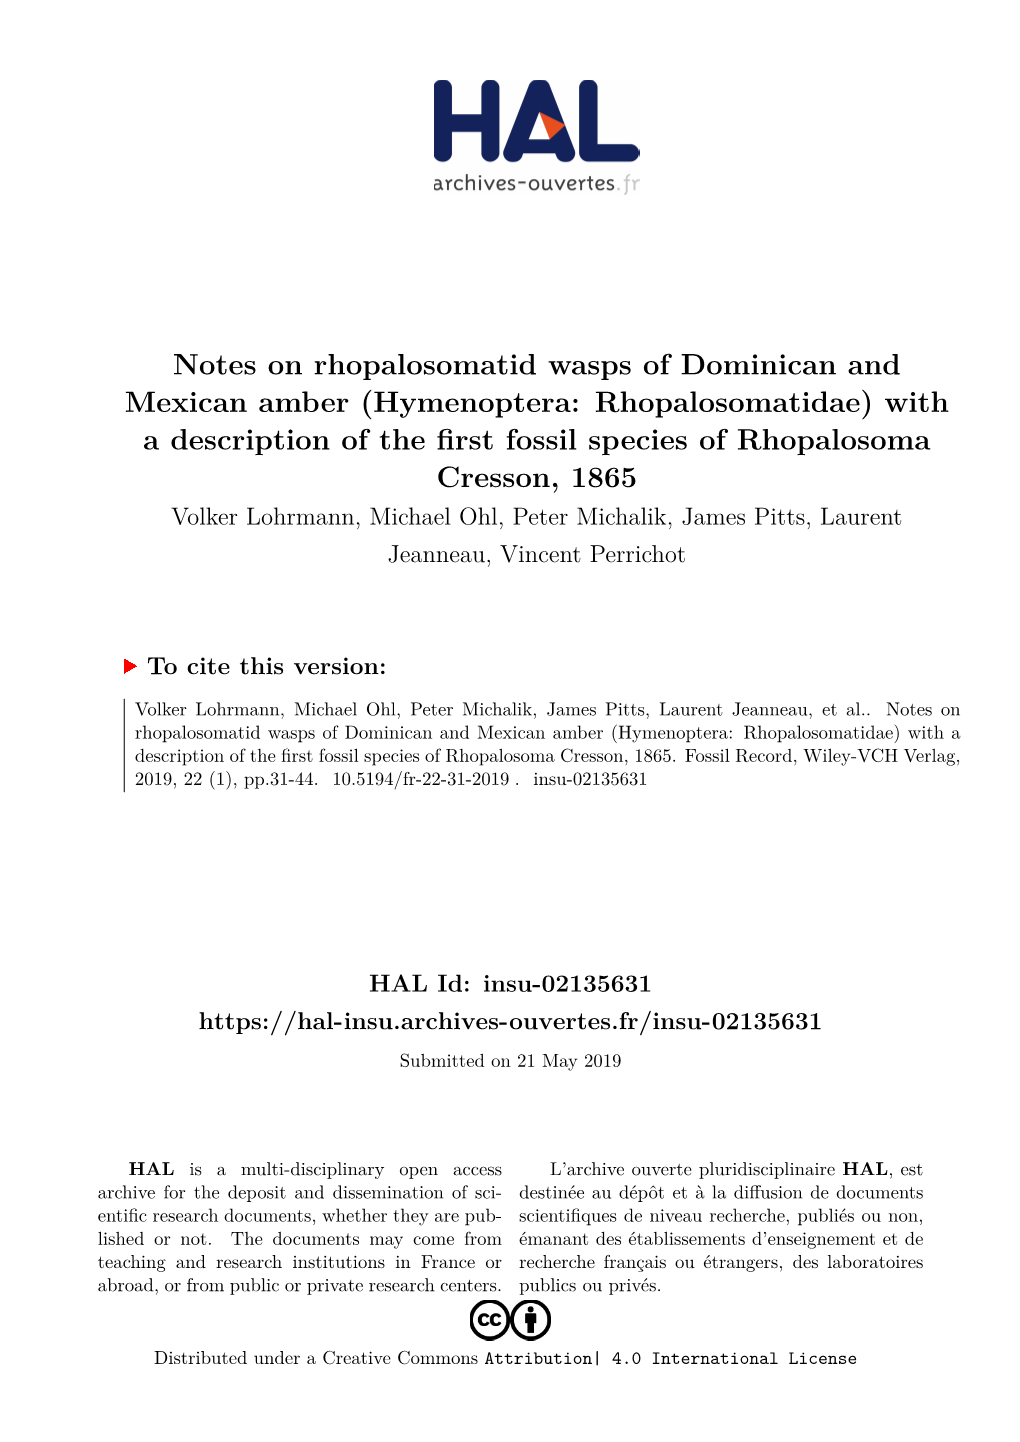 Notes on Rhopalosomatid Wasps of Dominican and Mexican